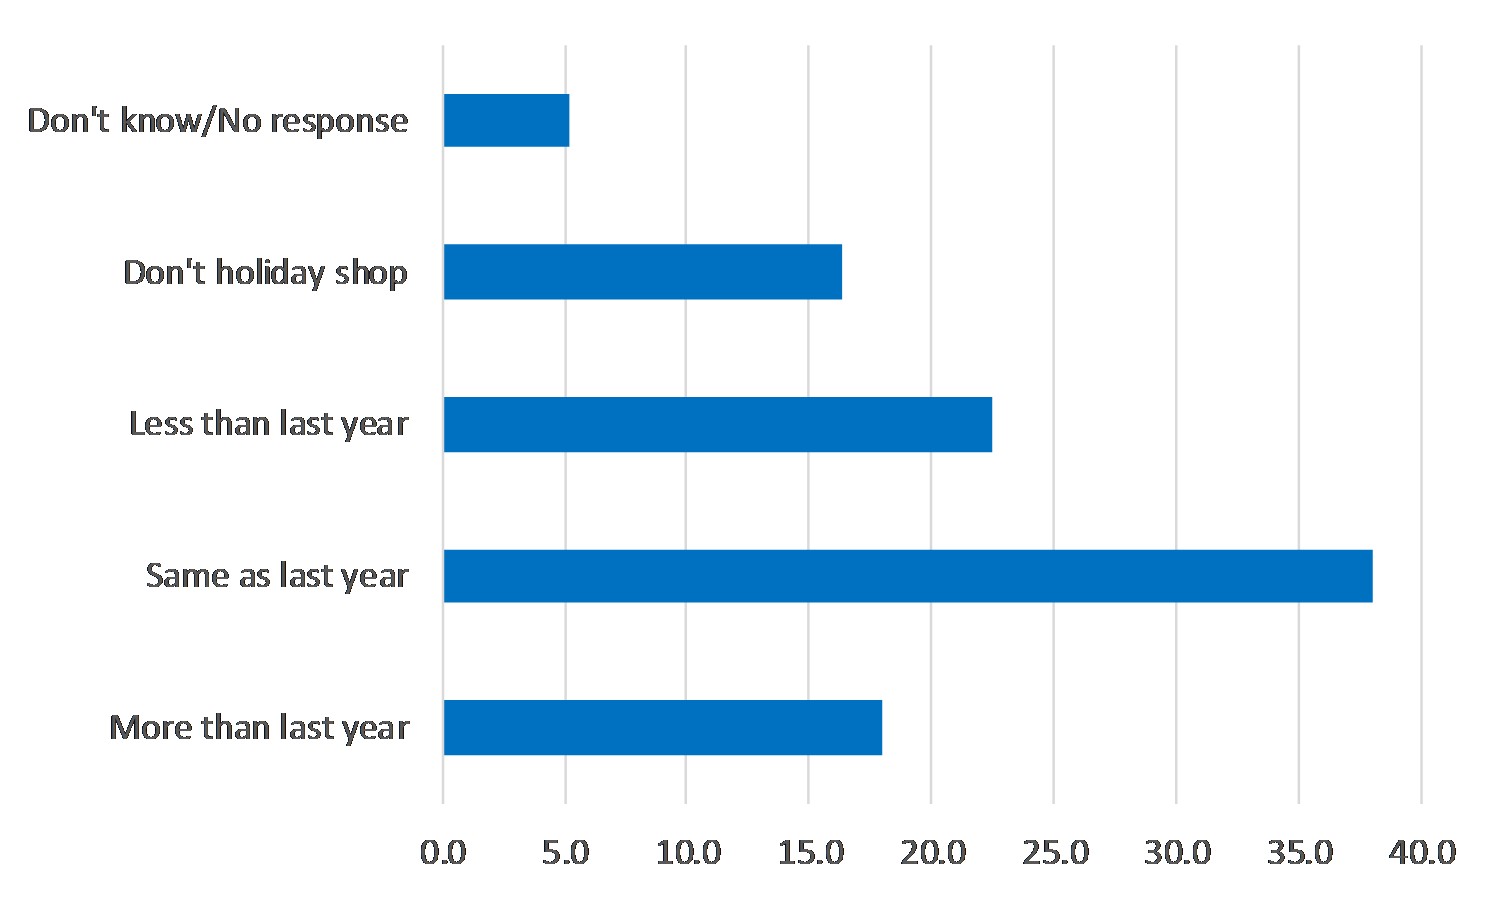 A bar chart showing categories of how much respondents will spend compared to last year.